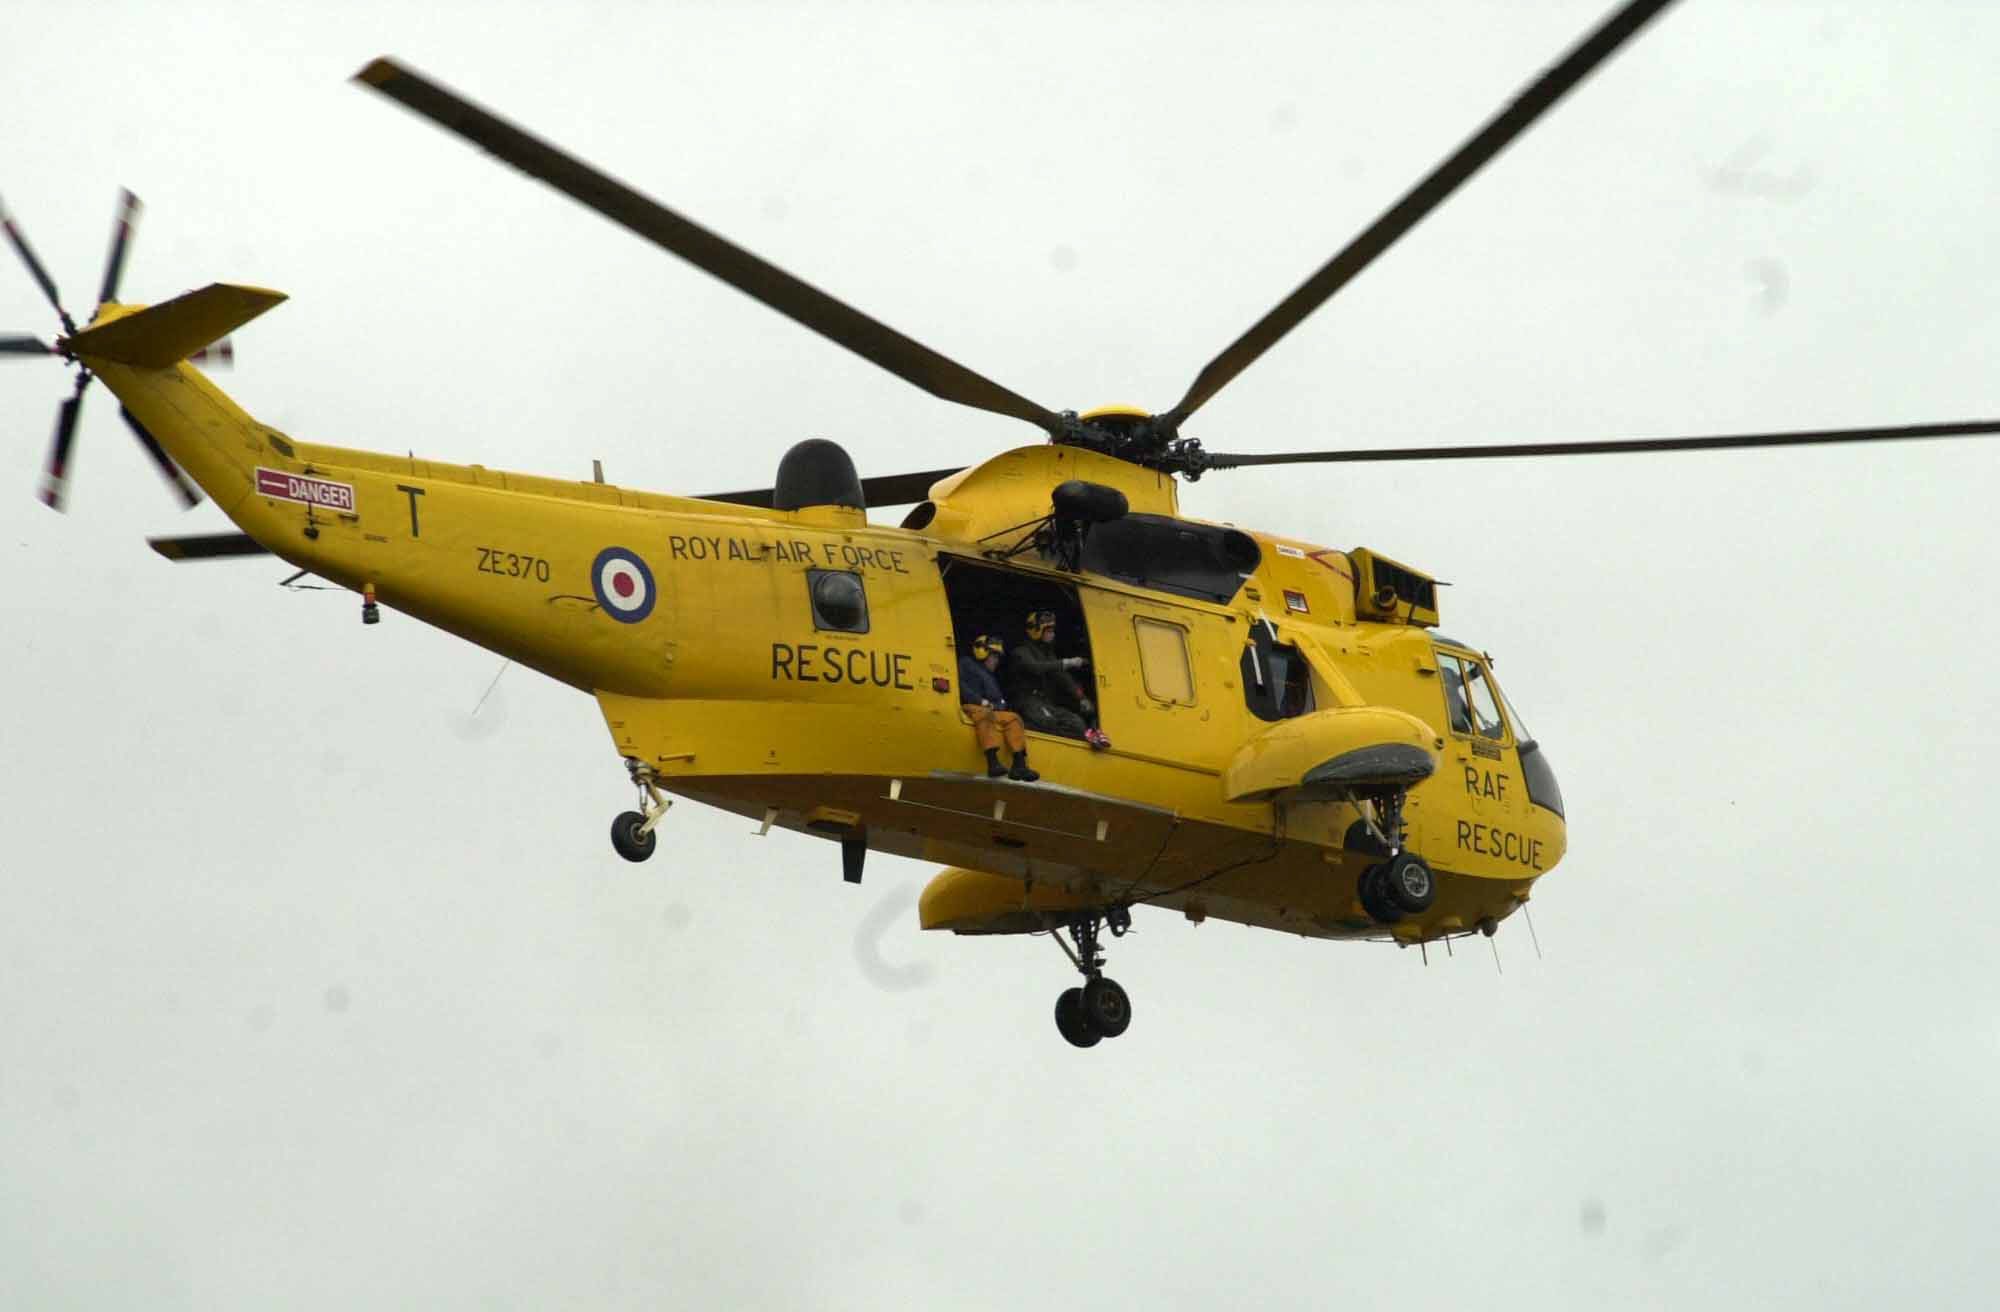 Sea King helicopters were stationed at RAF Lossiemouth until 2015.